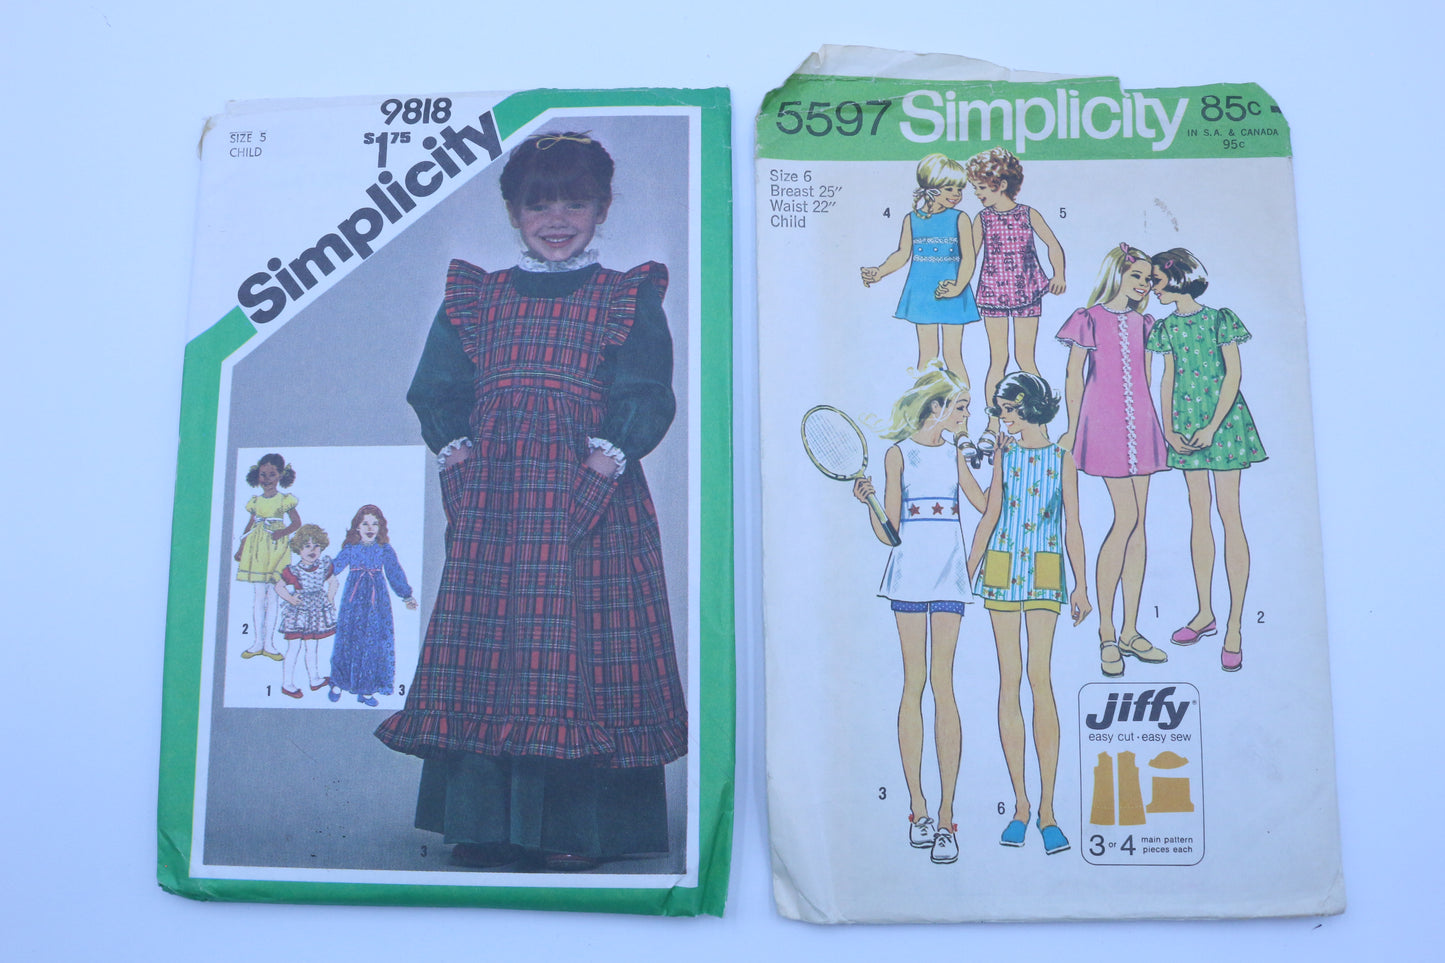 Simplicity 5597 Sewing Pattern or Simplicity 9818 Sewing Pattern